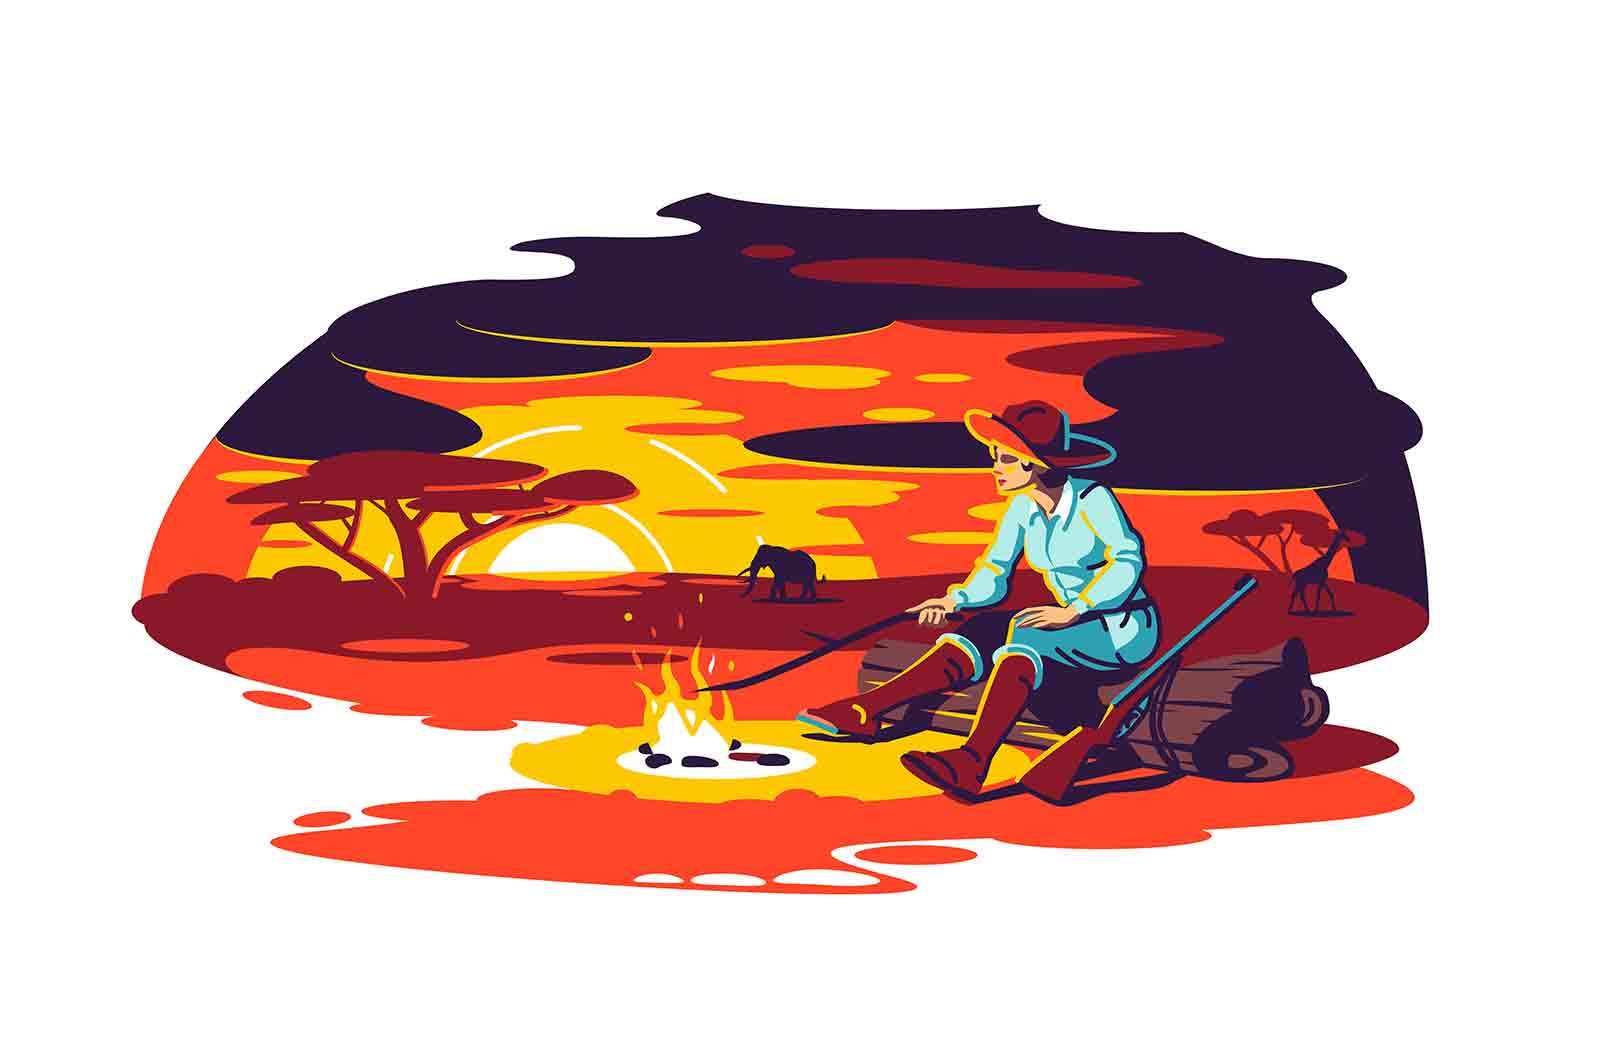 Character sit near fire in savanna vector illustration. Landscape with silhouettes of trees, orange sun flat style. Wildlife, nature concept